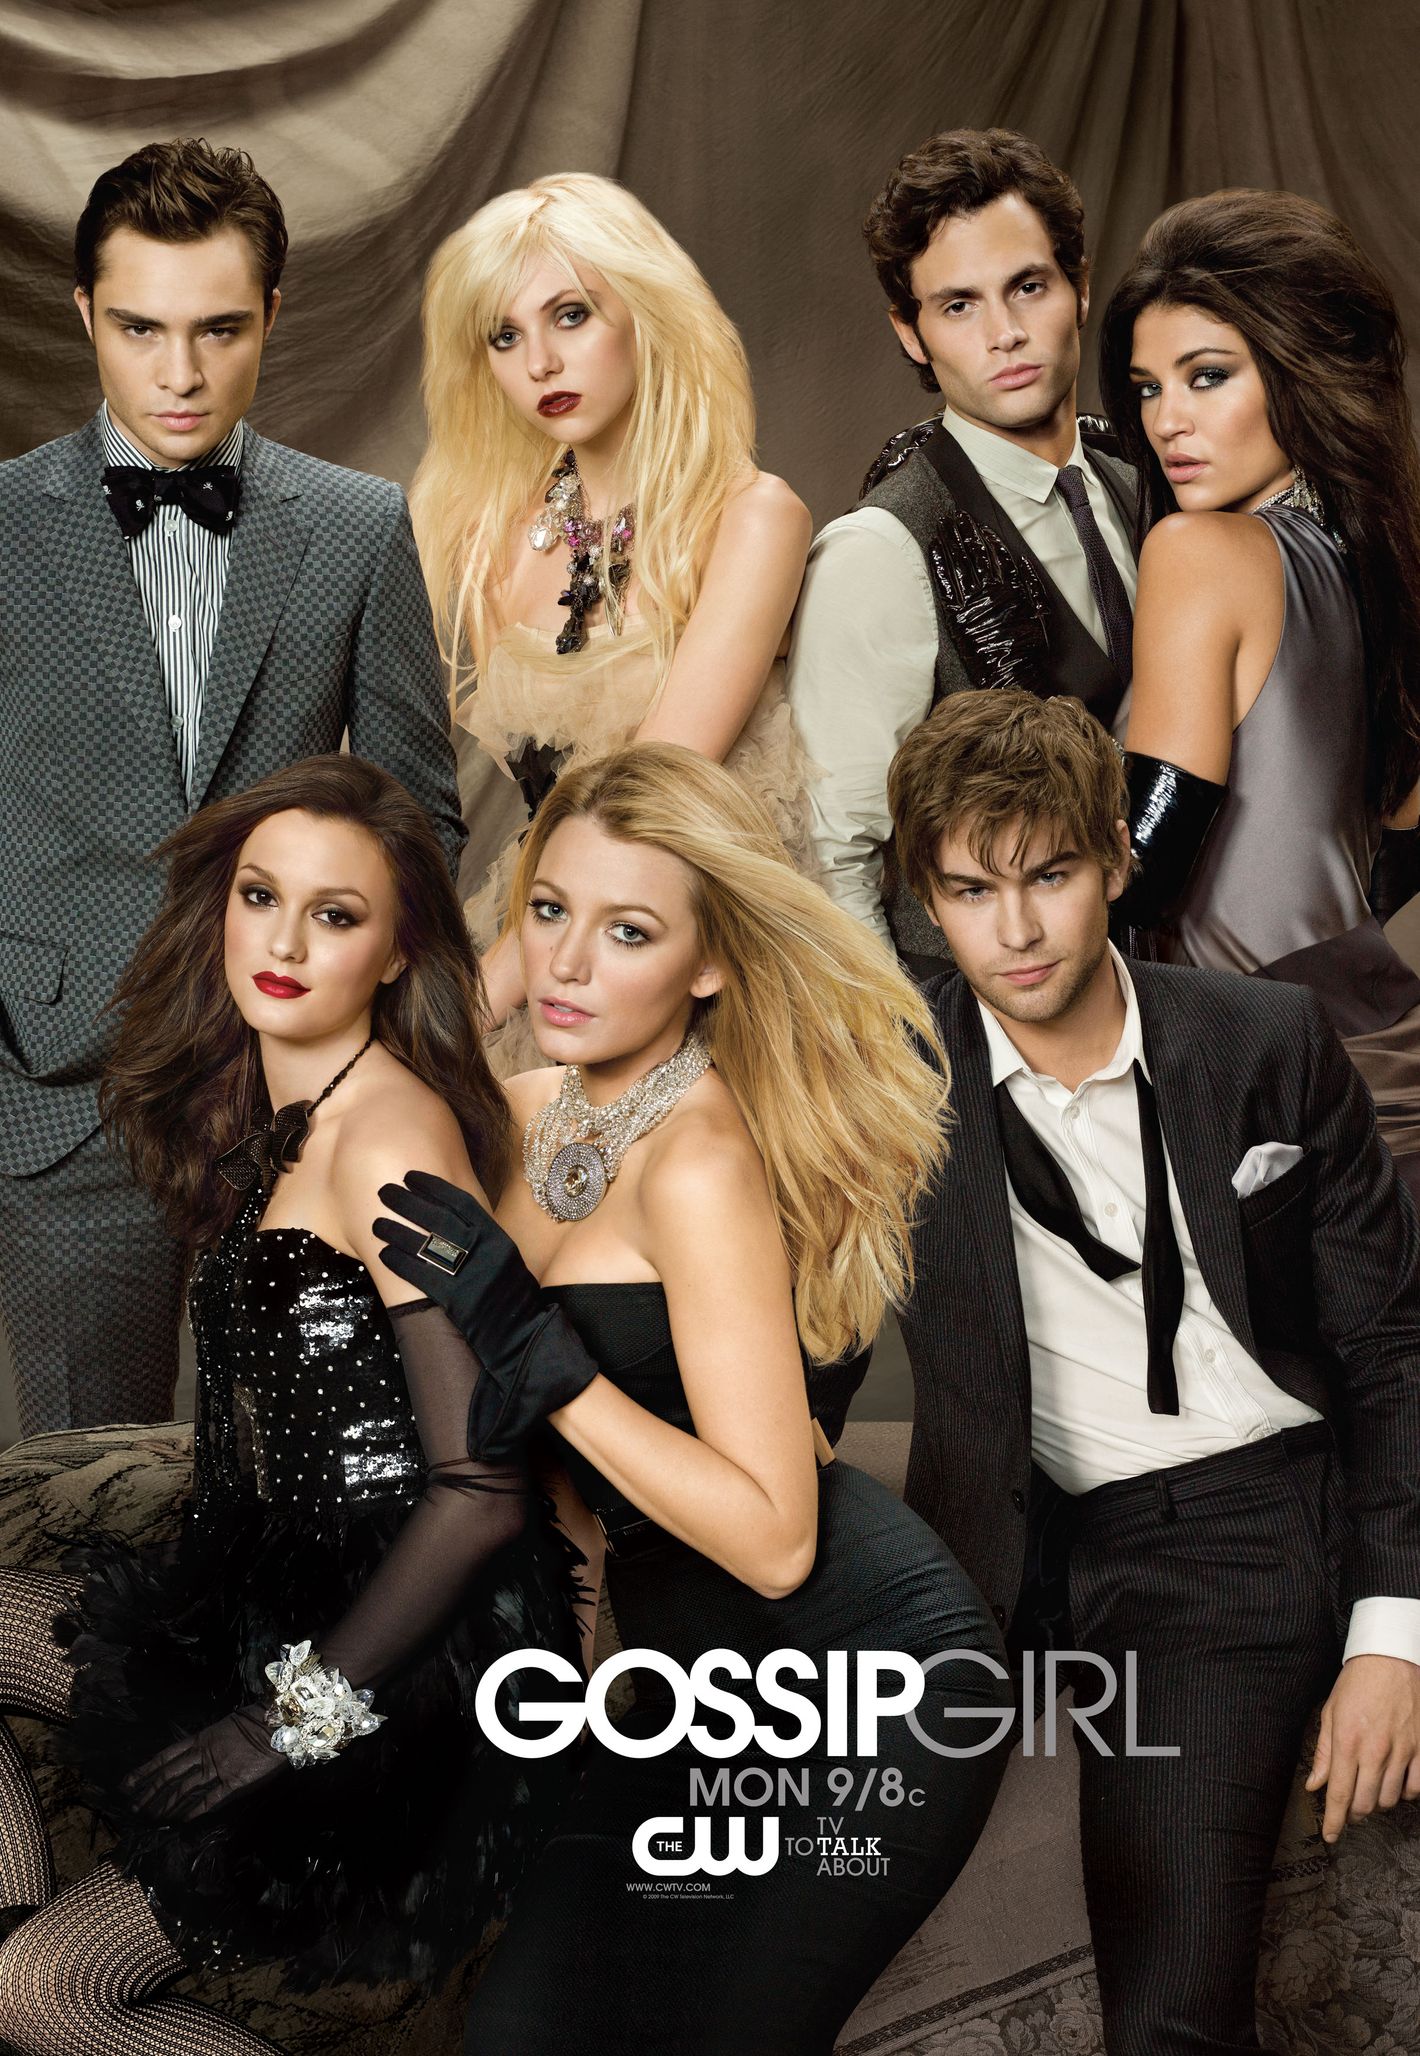 Gossip Girl Posters: What They Tell Us About the CW Show